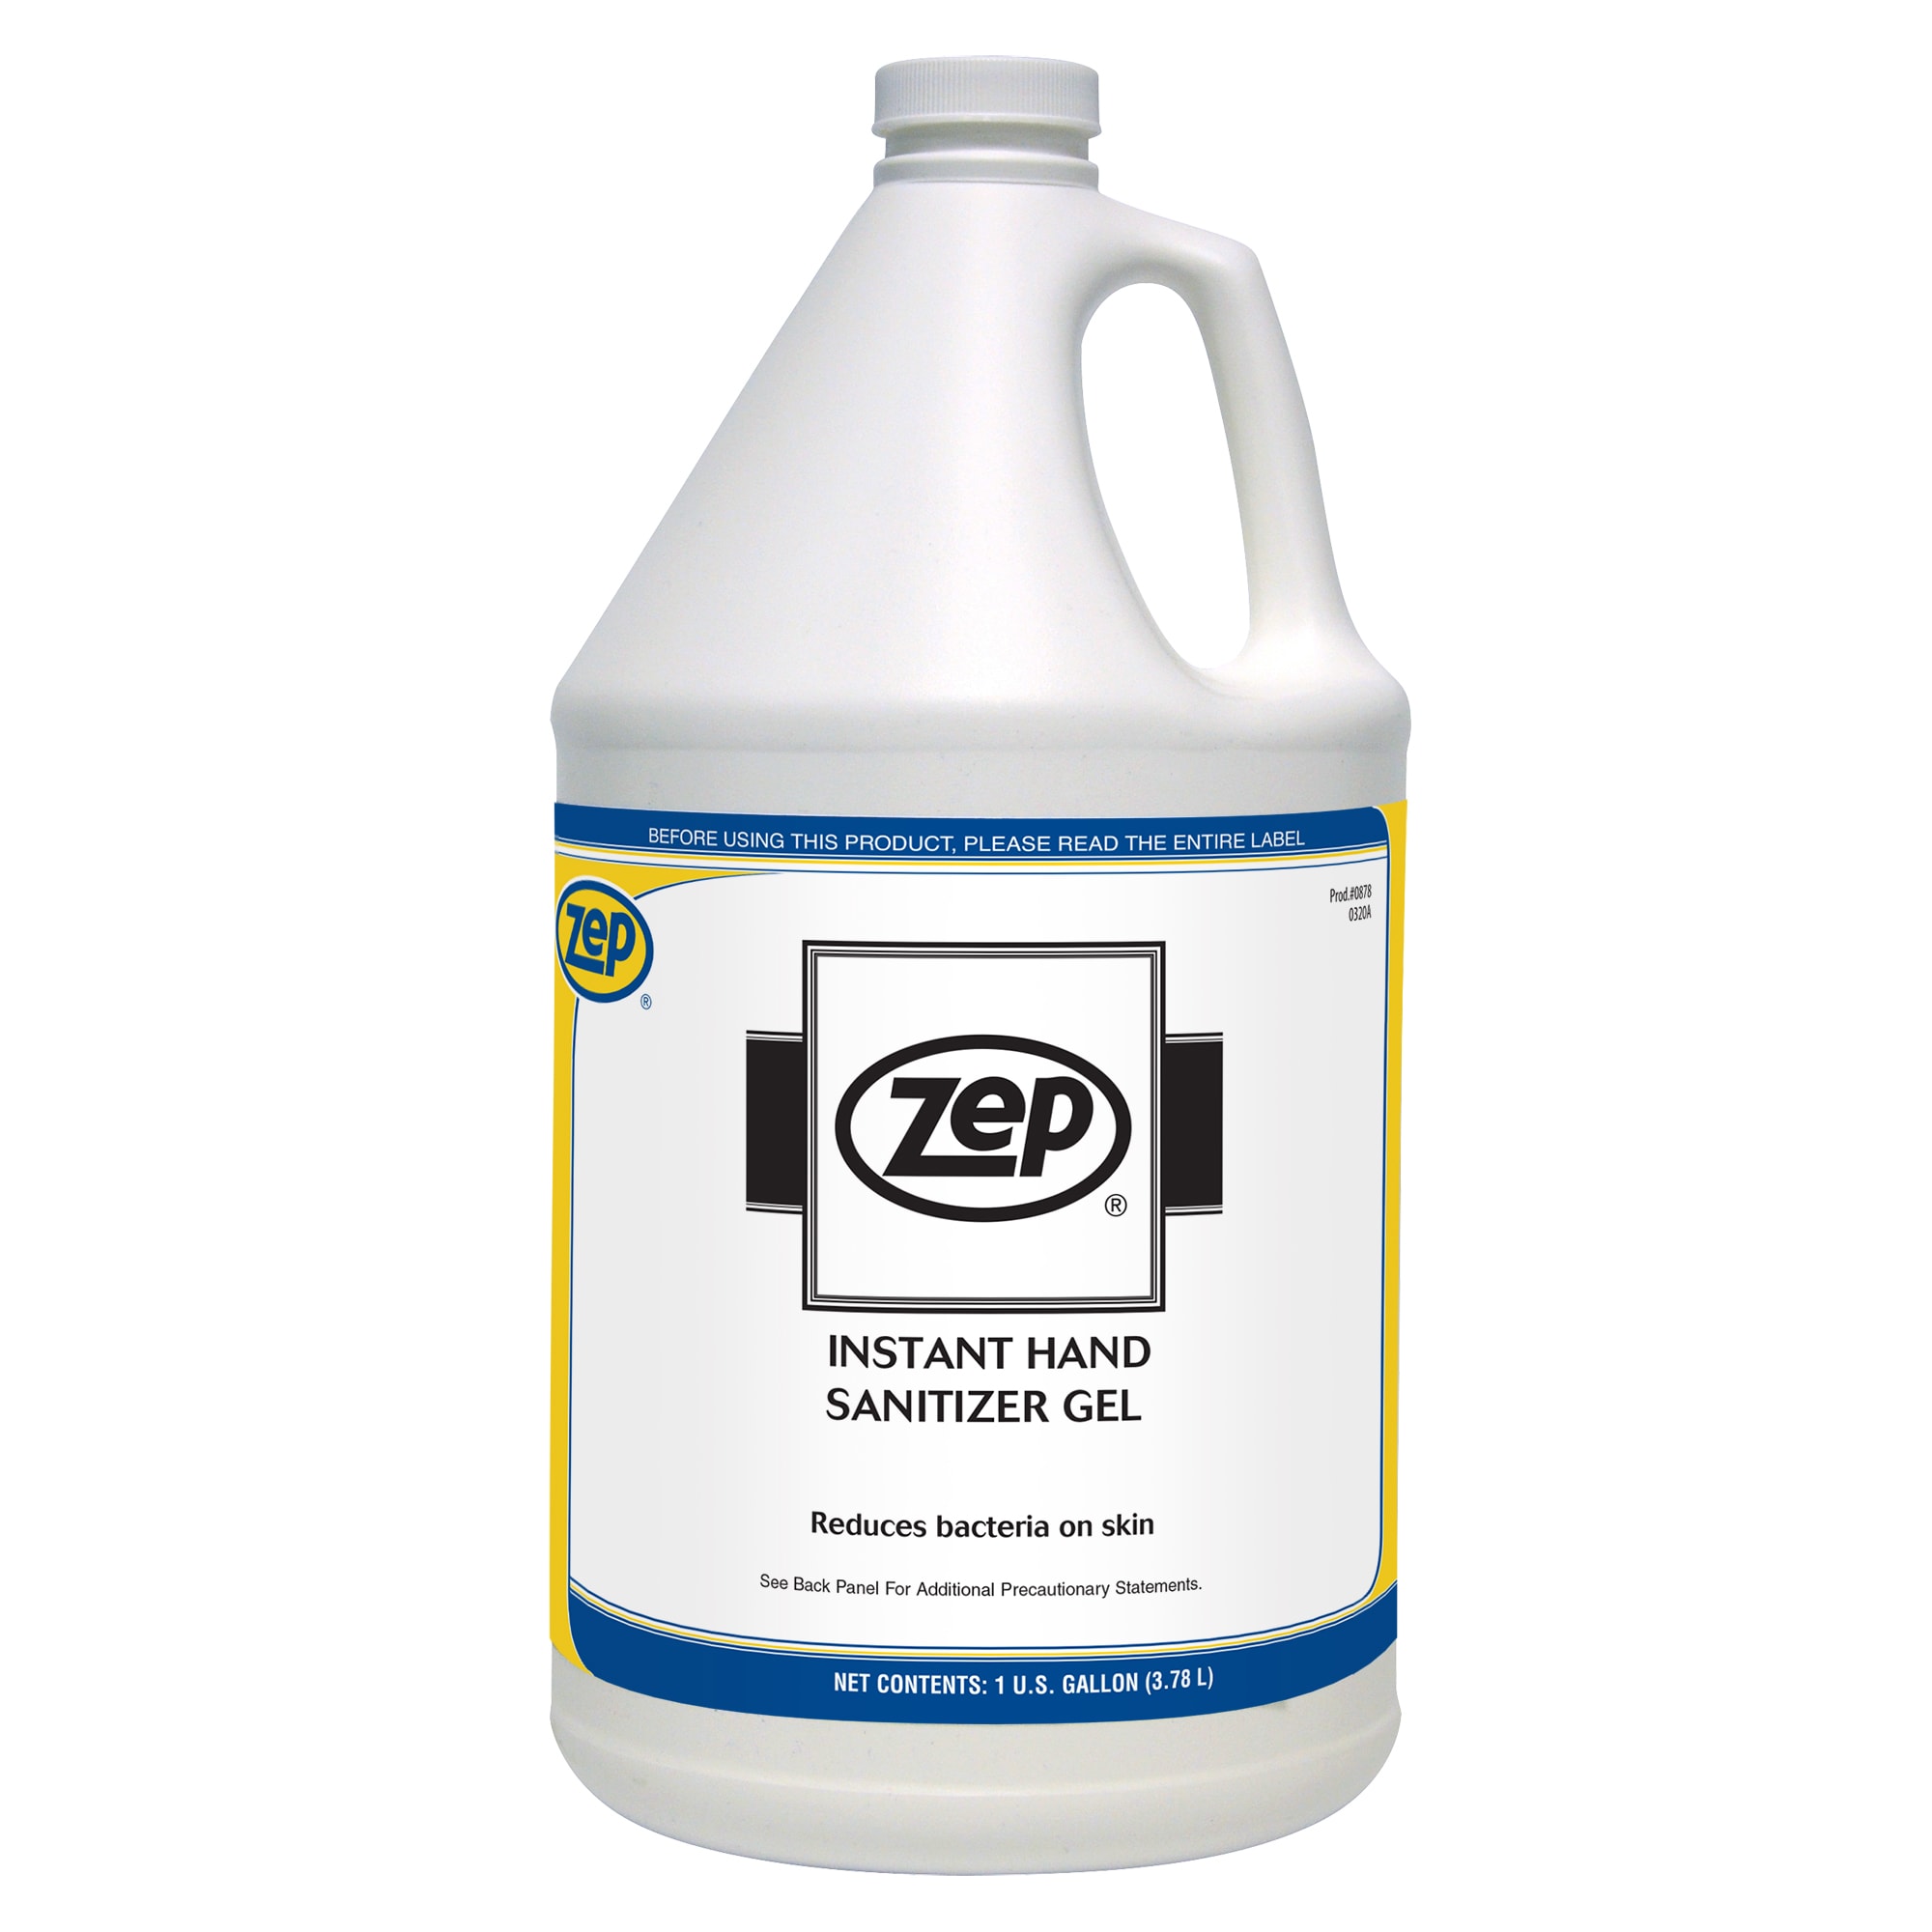 Zep Acclaim Industrial Antibacterial Hand Soap - 1 Gallon (Case of 4) 314925 - for Business and Home Use, Size: Gallon (Pack of 4)